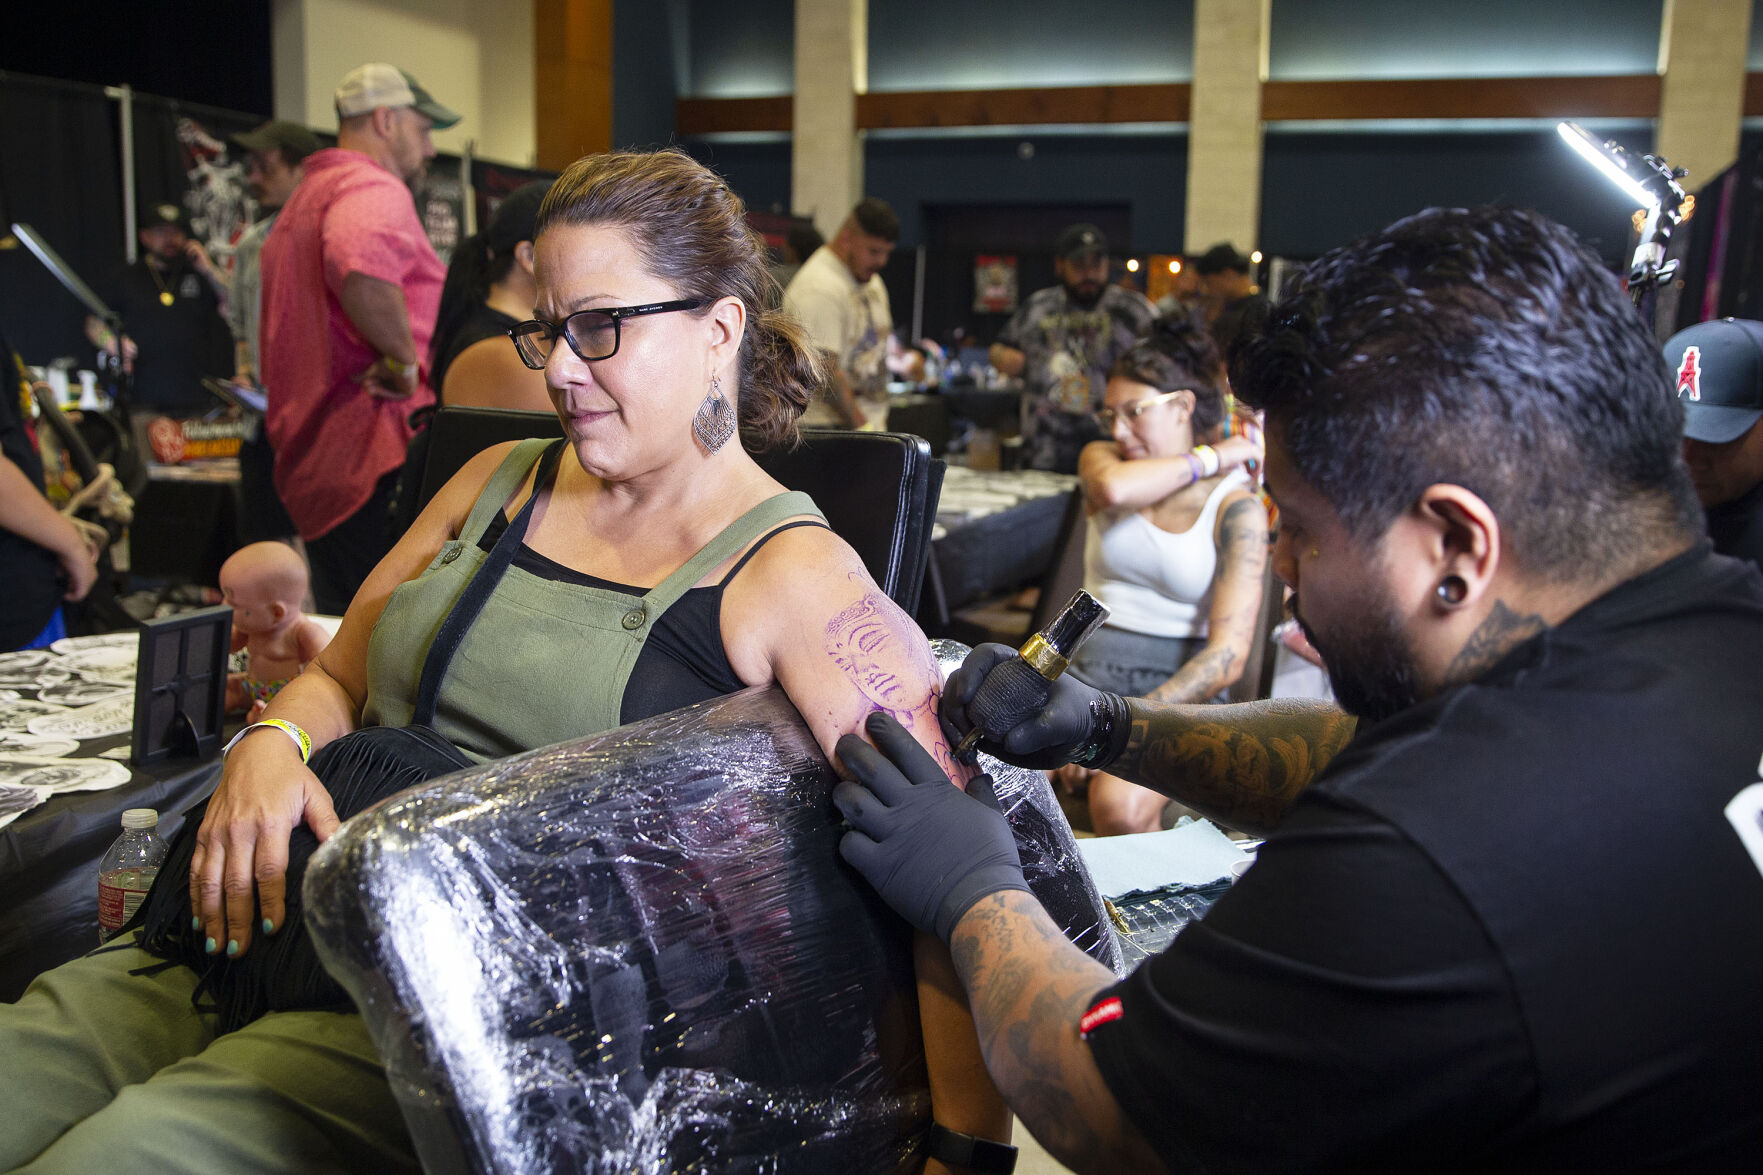 Local Tattoo Parlor Takes Home The Gold At Louisville Tattoo Convention